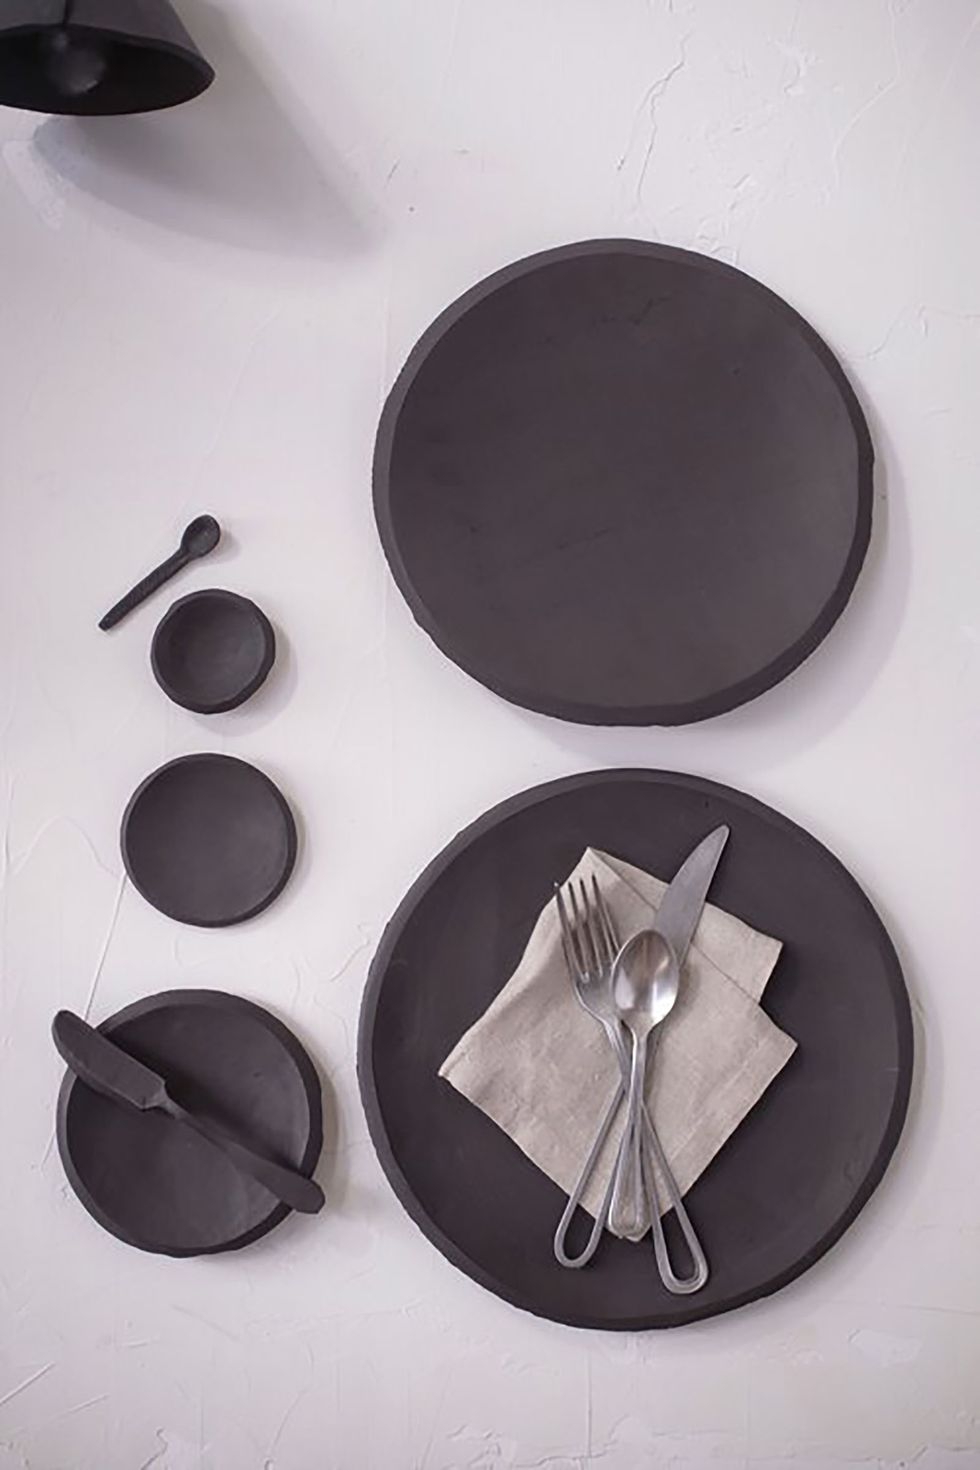 Circle, Black-and-white, Table, Still life photography, Monochrome photography, Tableware, Metal, Silver, 